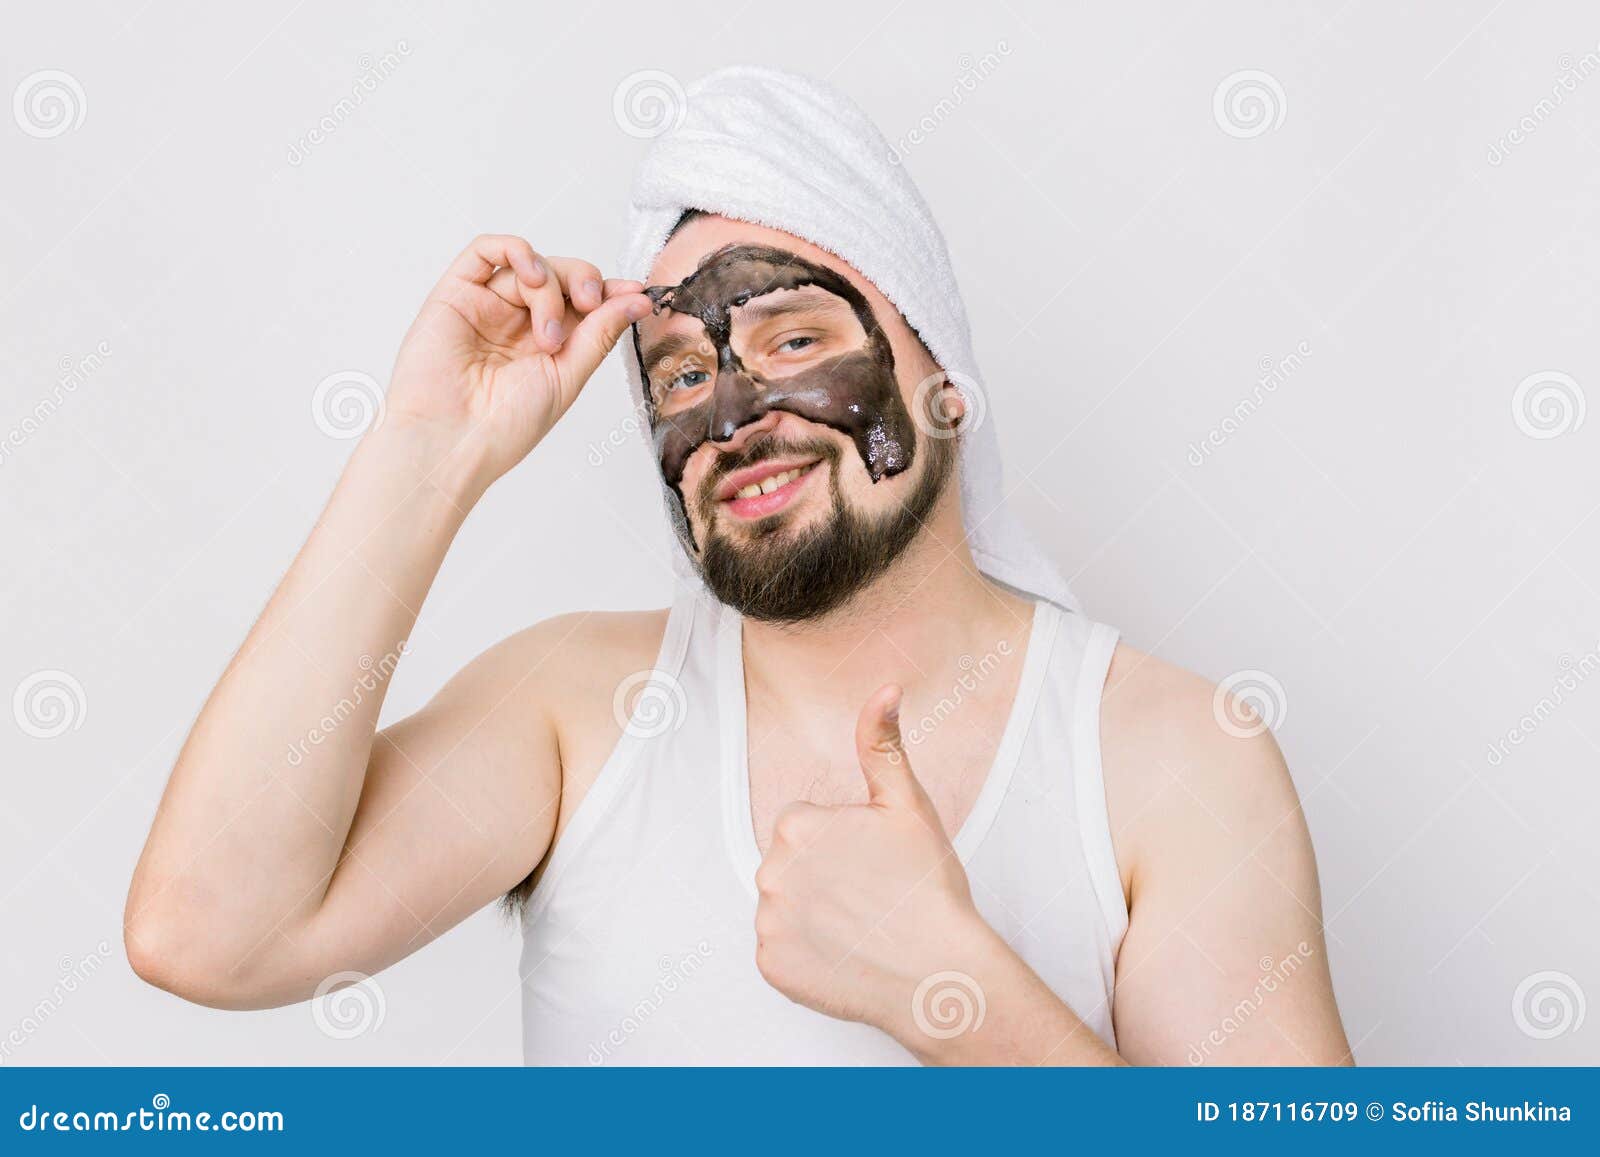 Spa and Skin Care for Men. Young Funny Guy with Black Anti Acne Charcoal on Face on White Background, Removing Stock Image - Image of beauty, face: 187116709